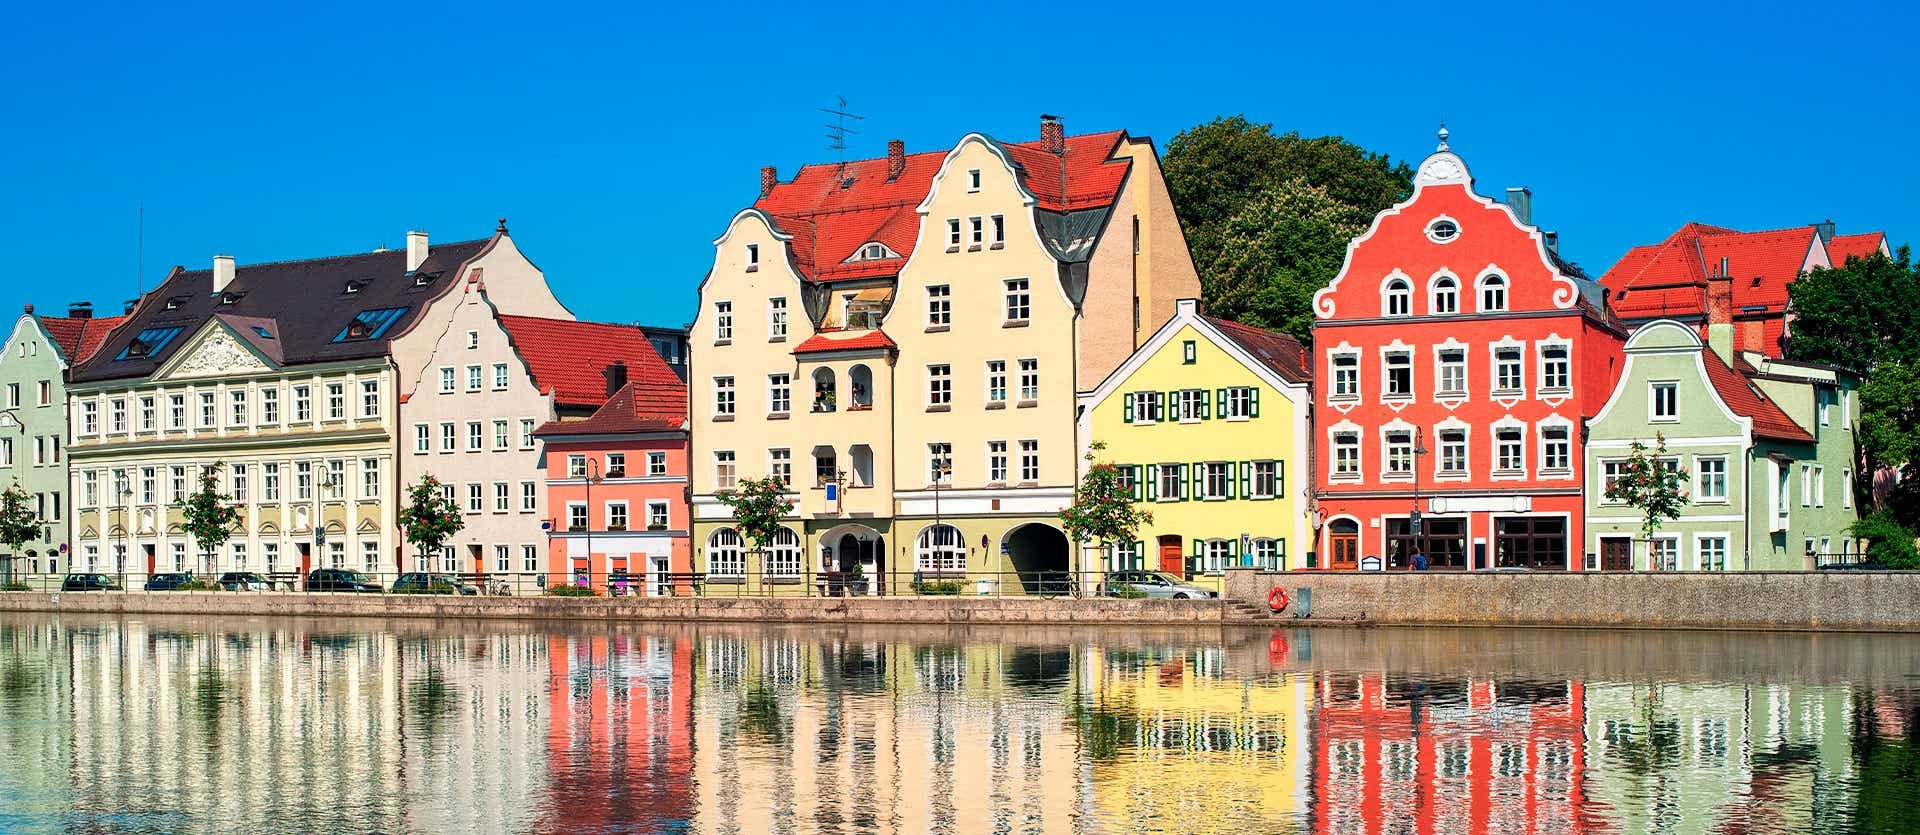 Traditional Houses on the River Isar <span class="iconos separador"></span> Munich <span class="iconos separador"></span> Germany